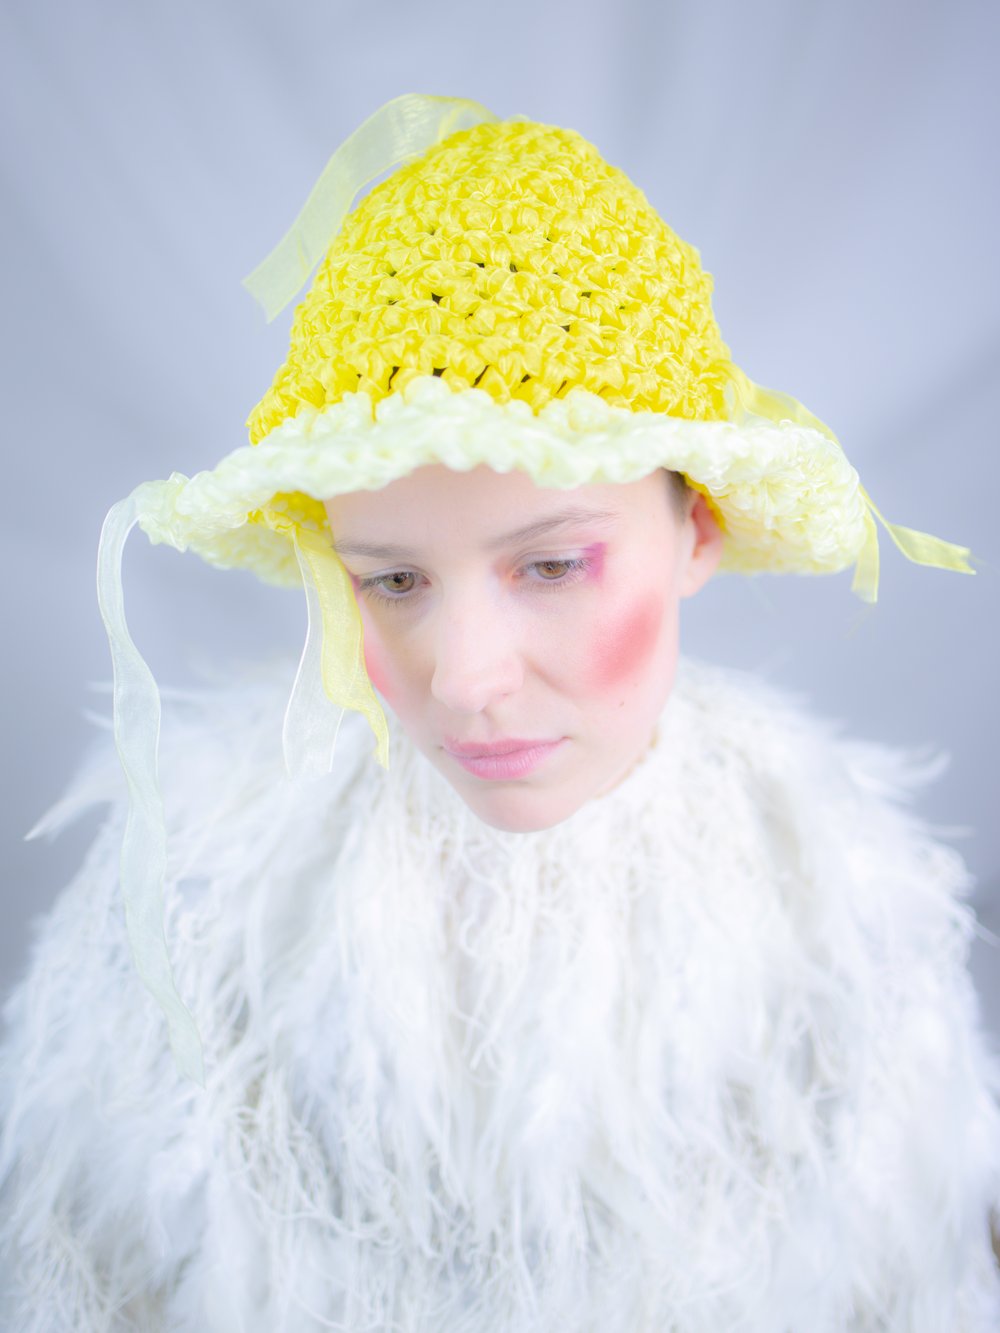 THE FLOWER-PICKING HAT